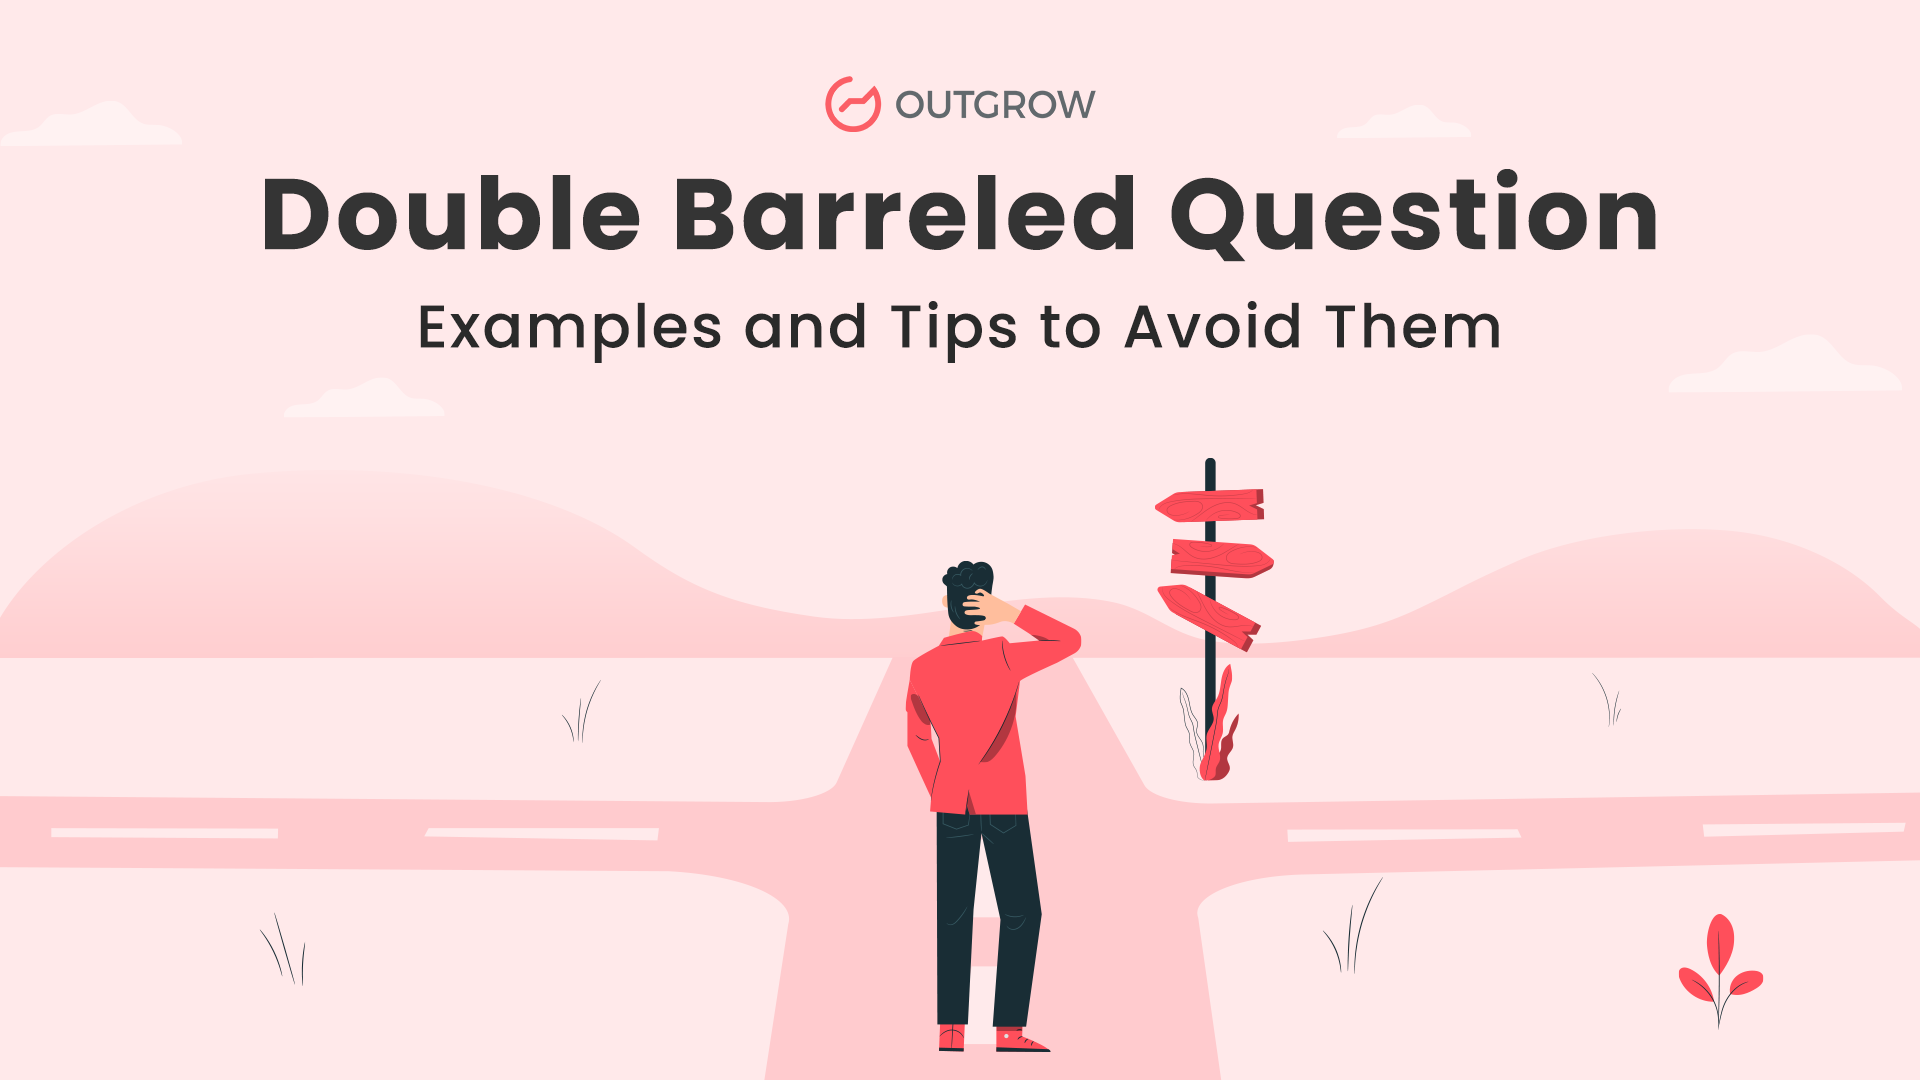 Double Barreled Question: Examples and Tips to Avoid them